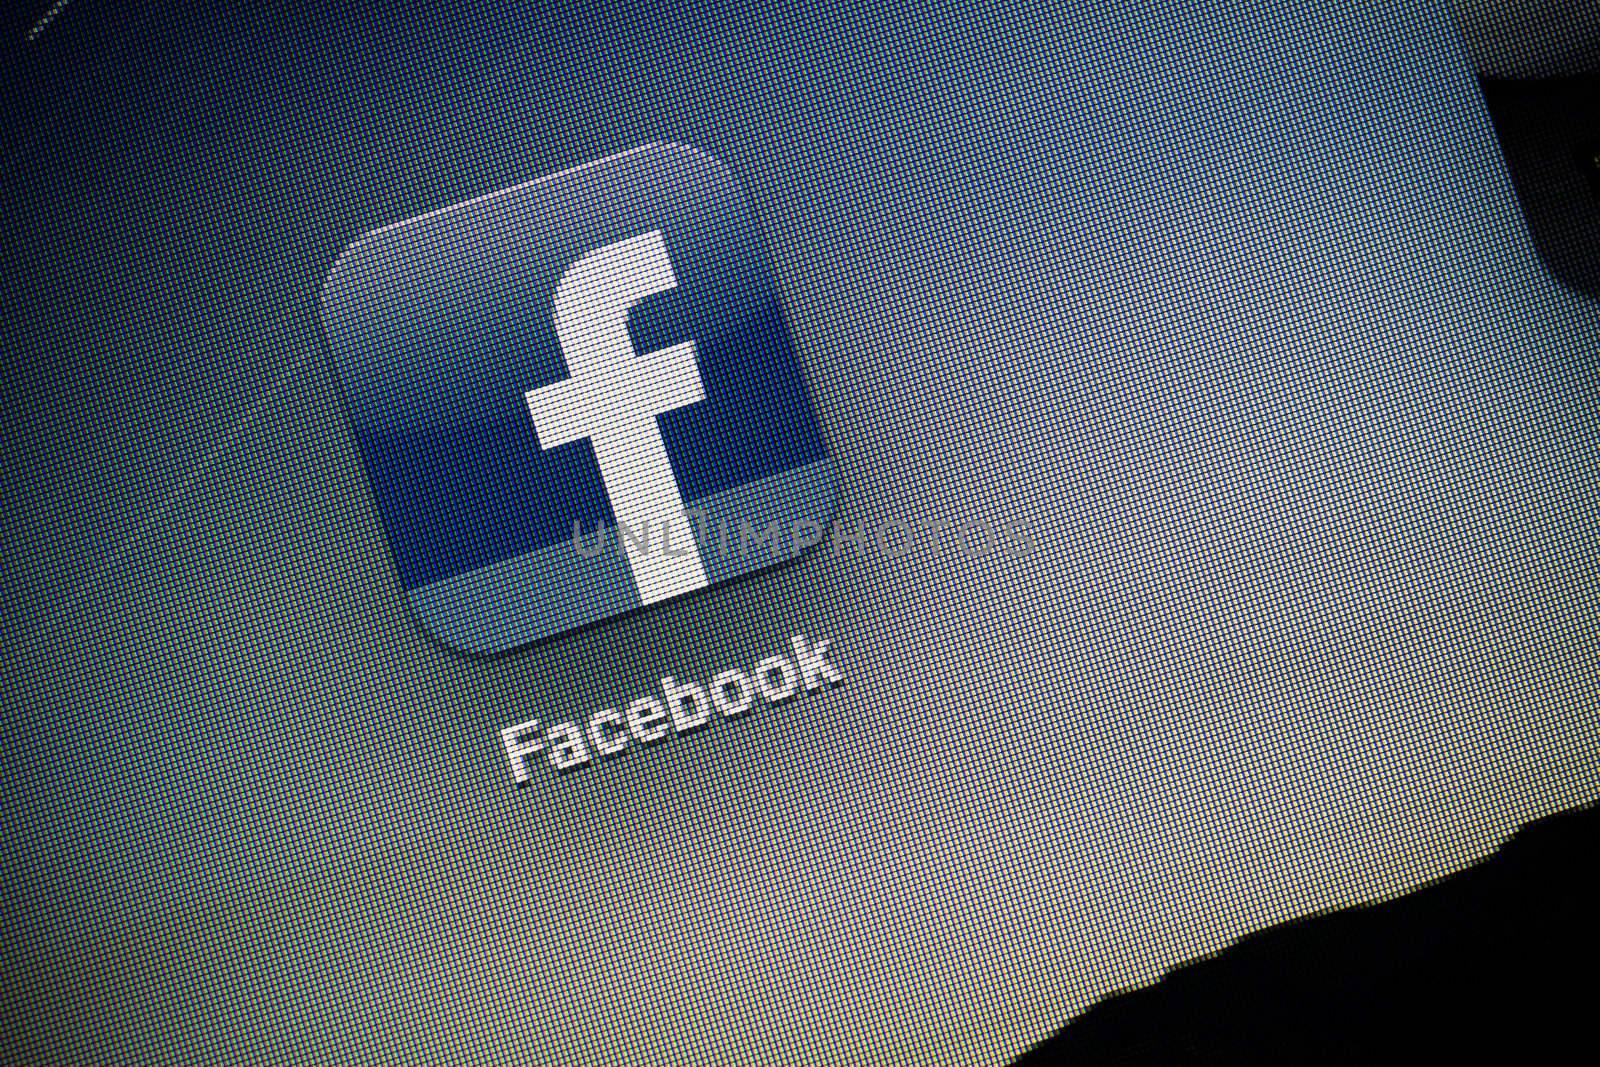 Kiev, Ukraine - October 15, 2011: Macro shot of Facebook logo on the screen of Apple Ipad2. Facebook is largest and most used social network.